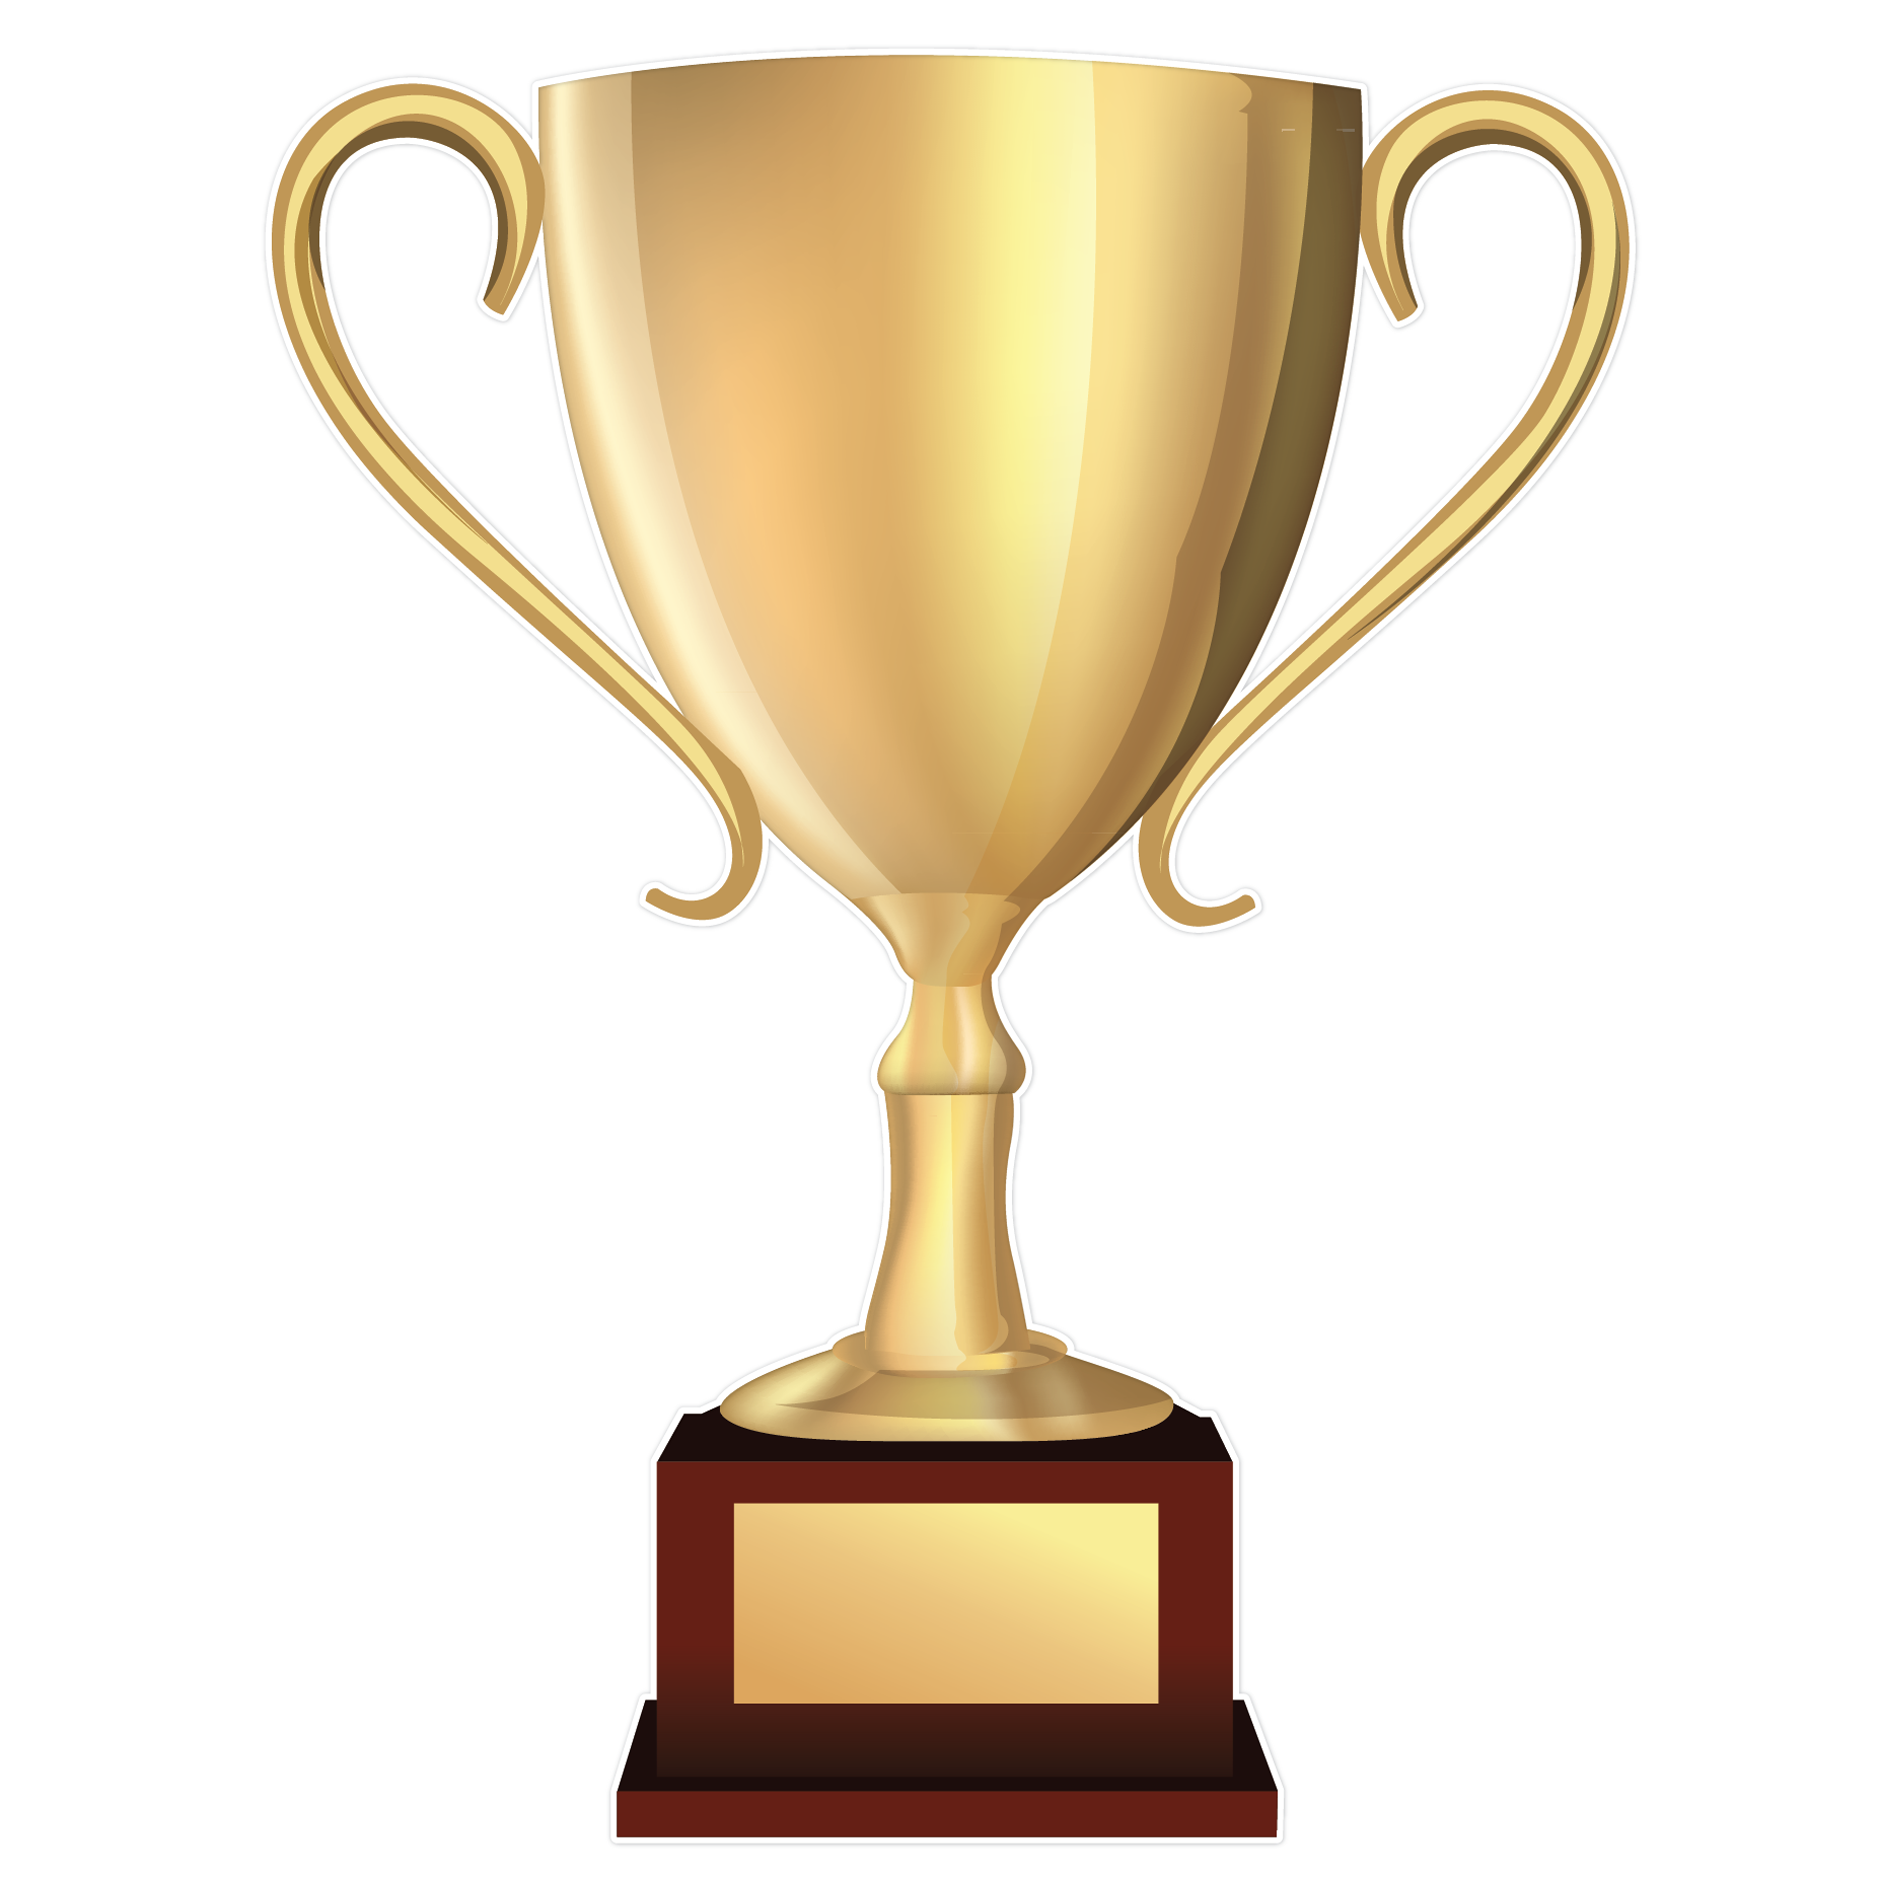 Free download best . 1 clipart trophy